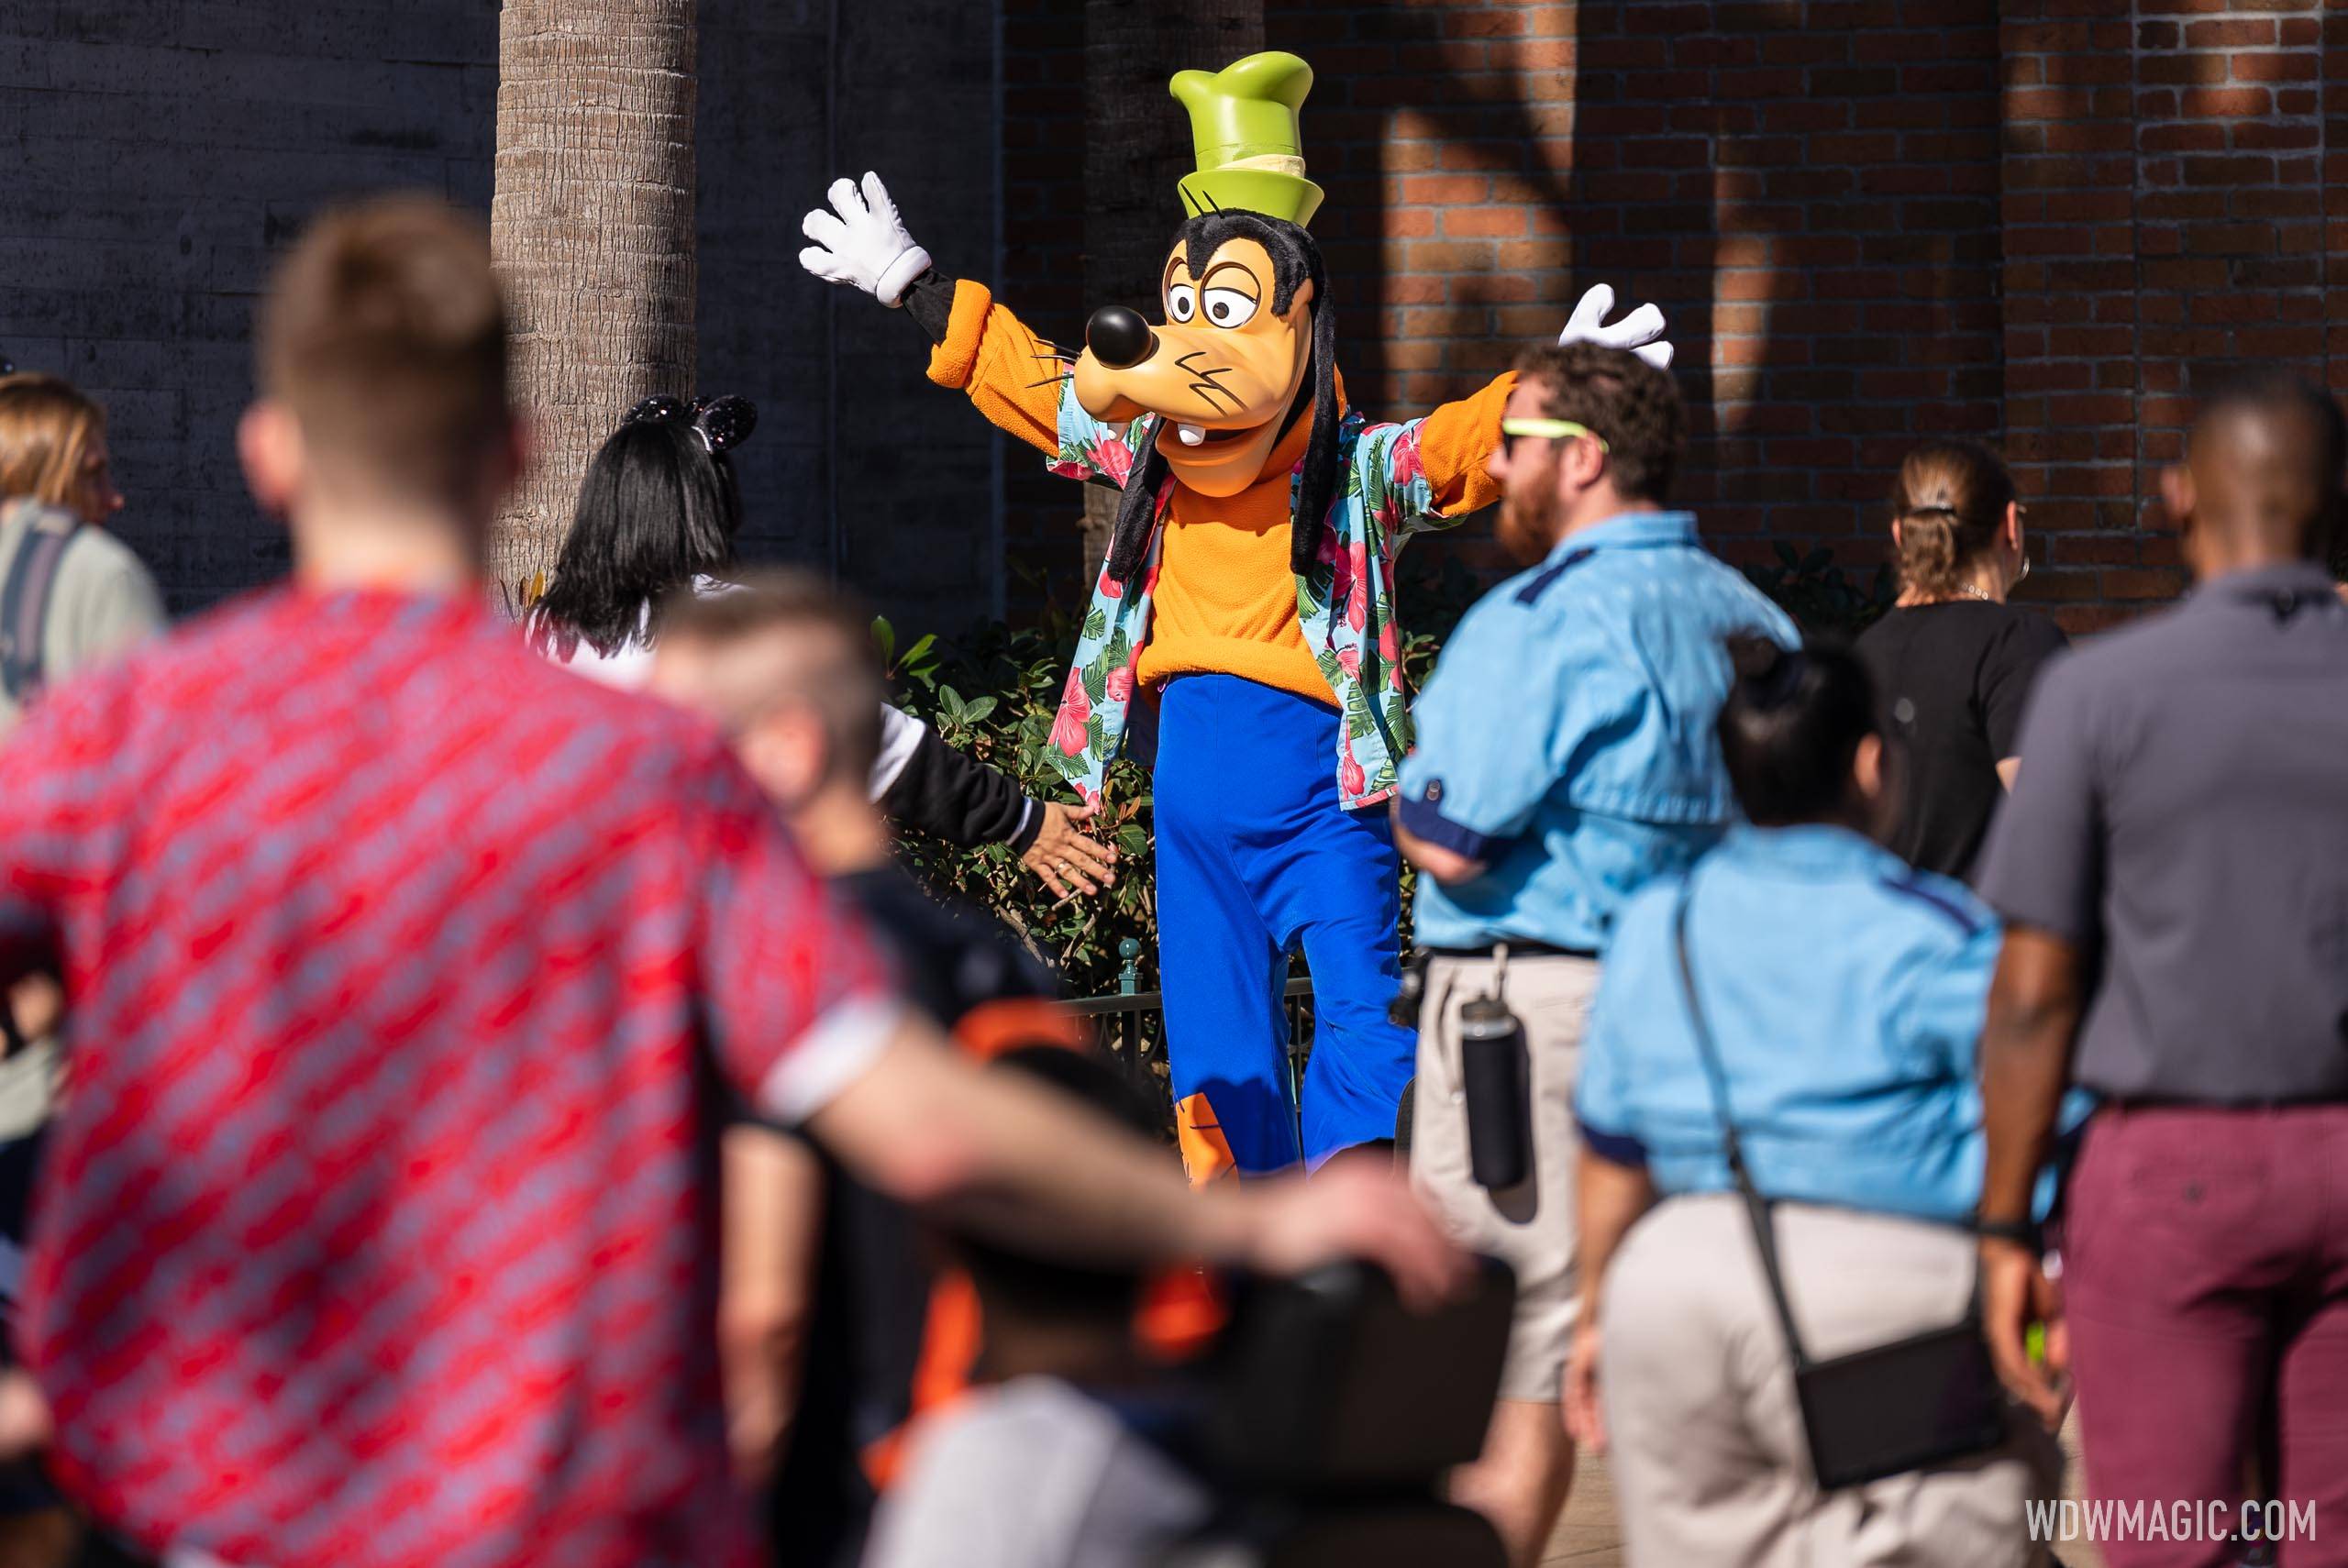 Goofy meeting guests on Grand Avenue